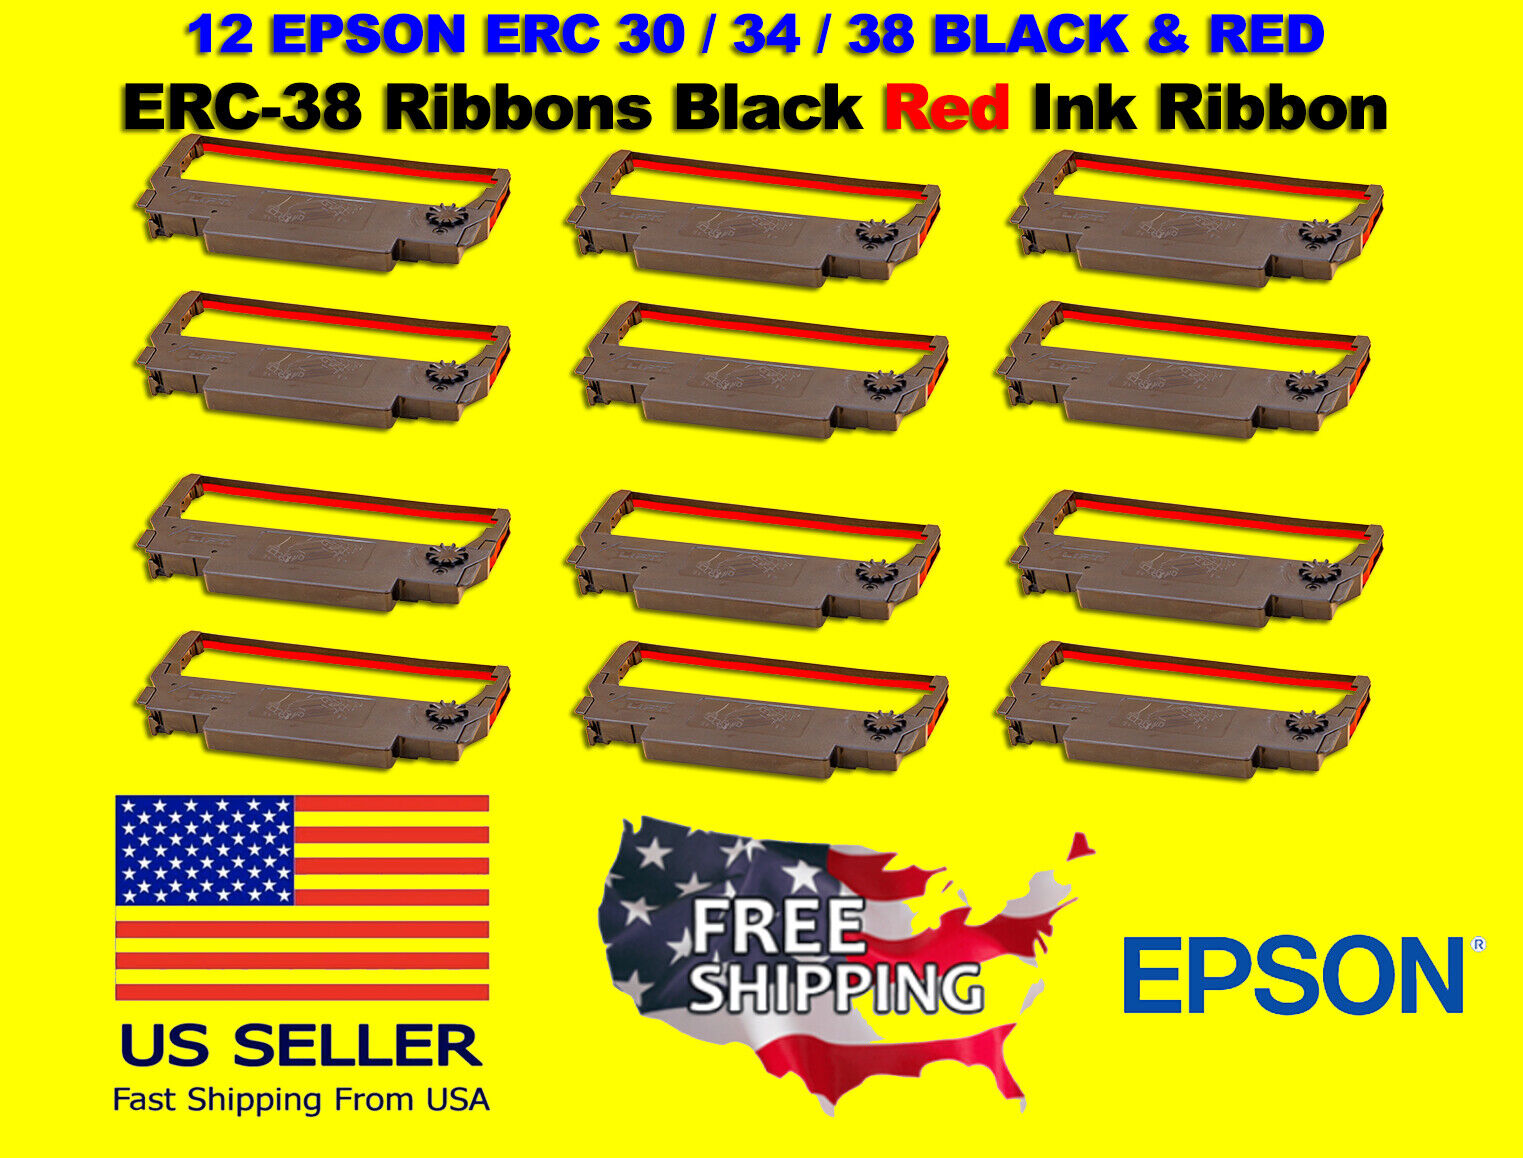 12 EPSON ERC 30 / 34 / 38 BLACK & RED INK PRINTER RIBBONS **FREE SHIPPING** NEW